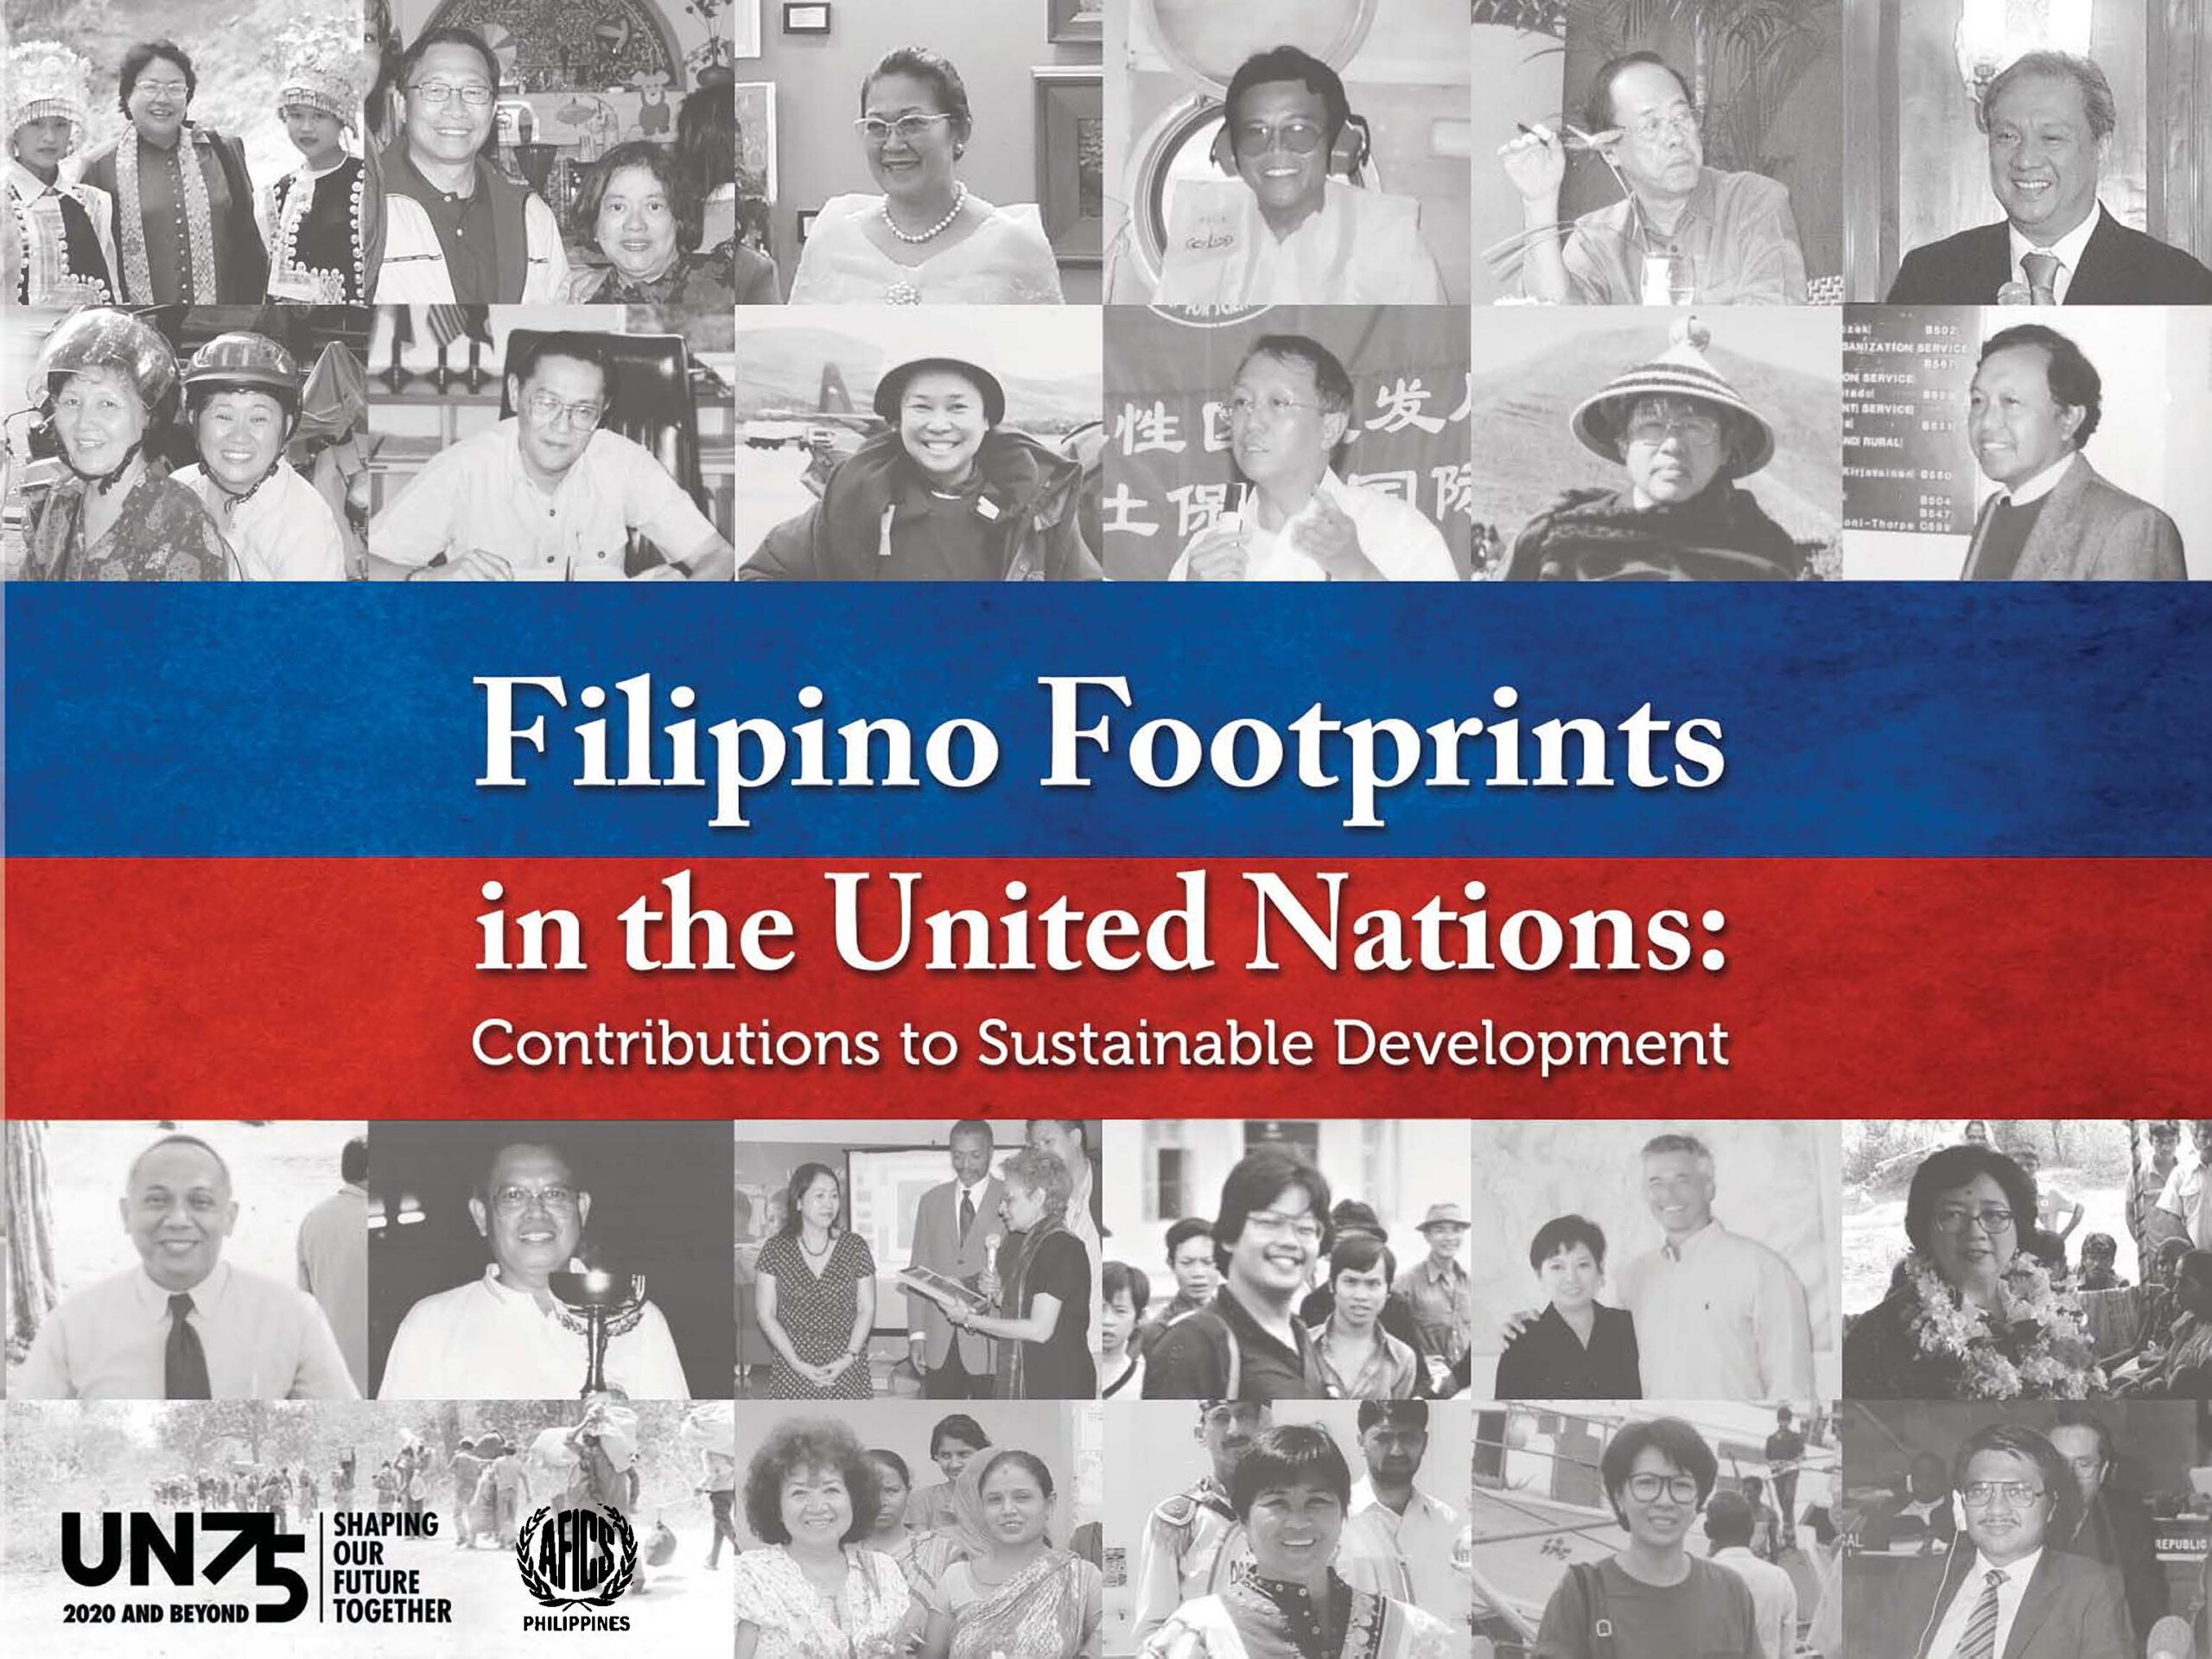 The UN in the eyes of Filipinos through the years